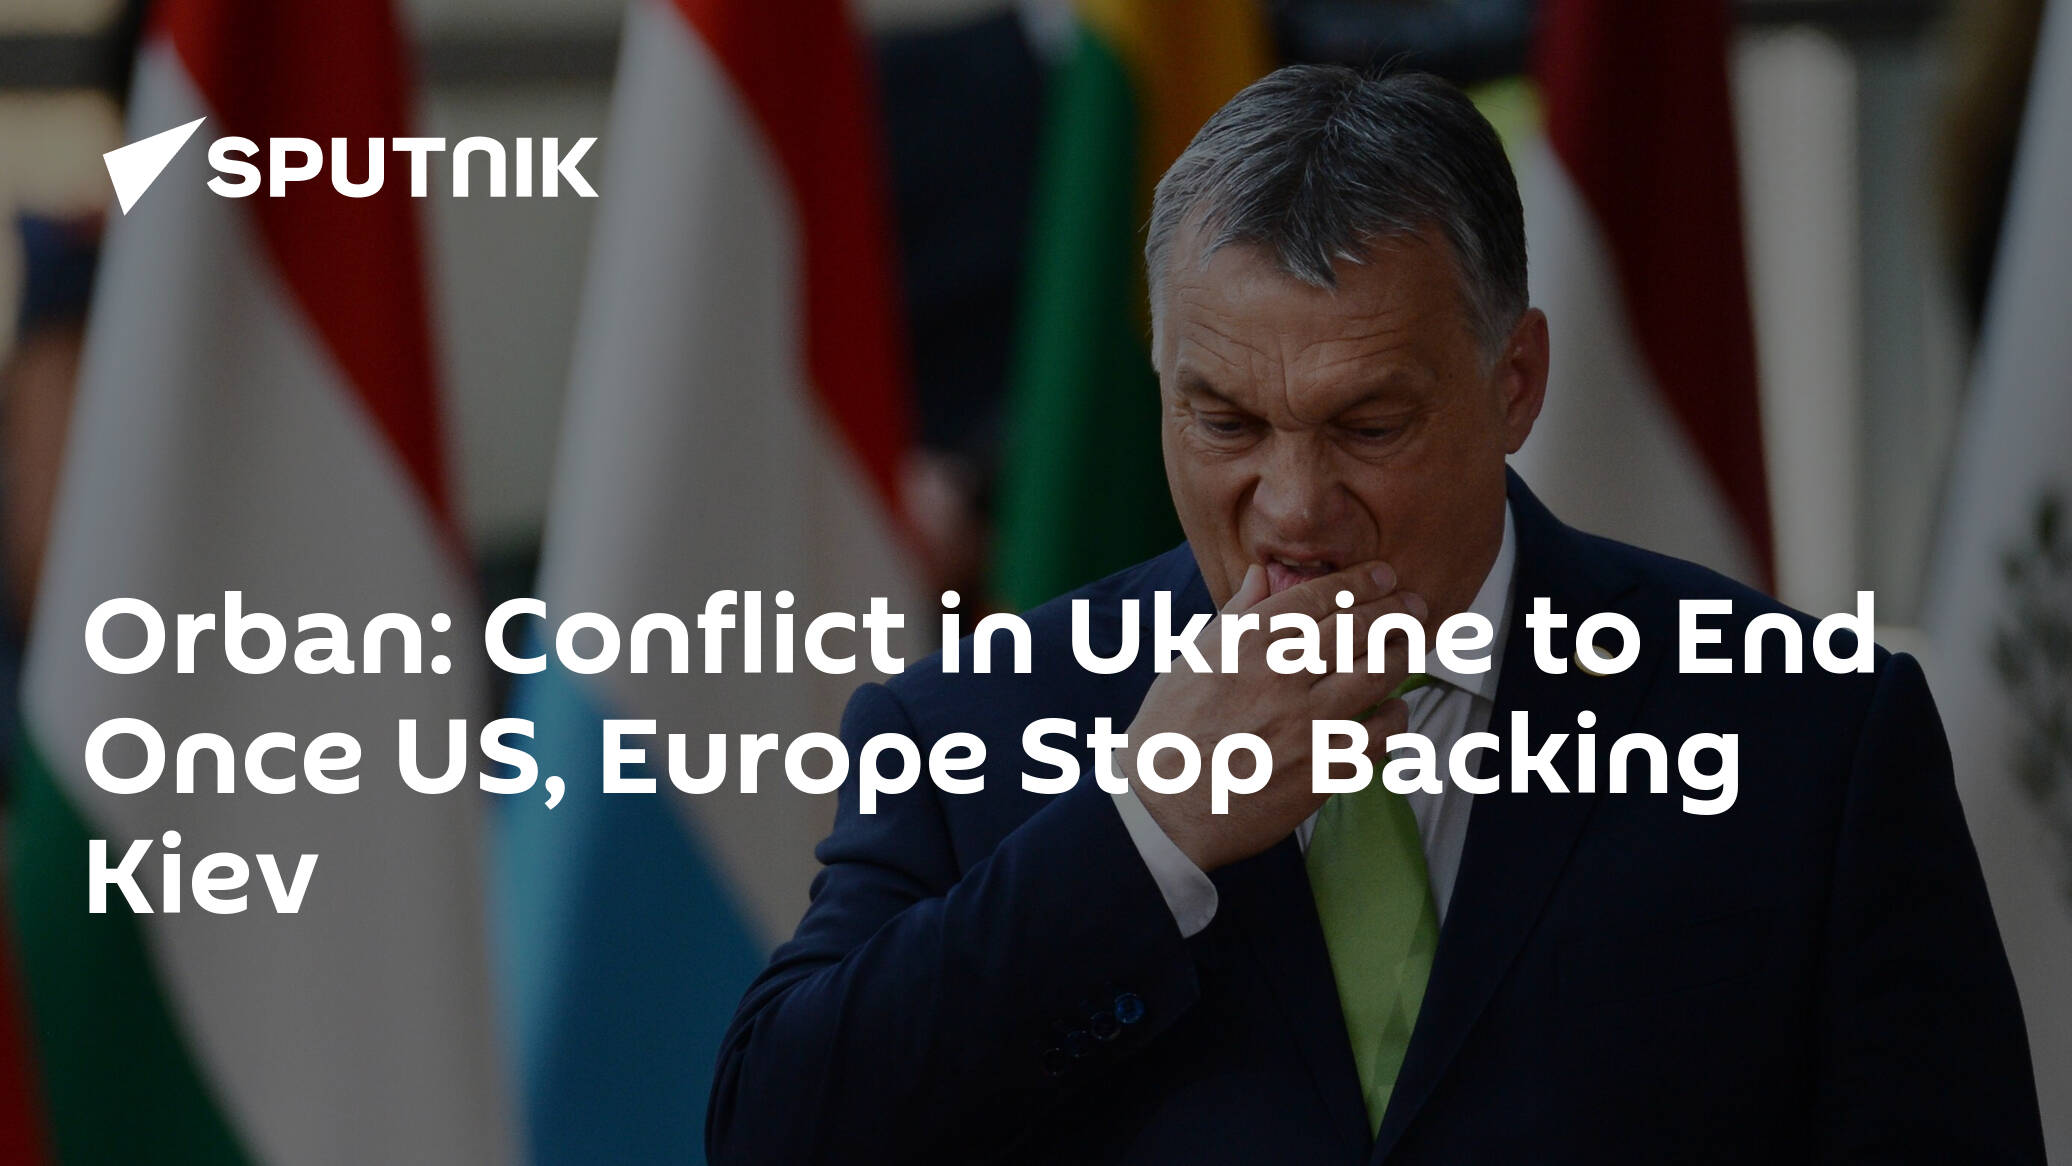 Orban: Conflict in Ukraine Will End as Soon as US, Europe Stop Supporting Kiev